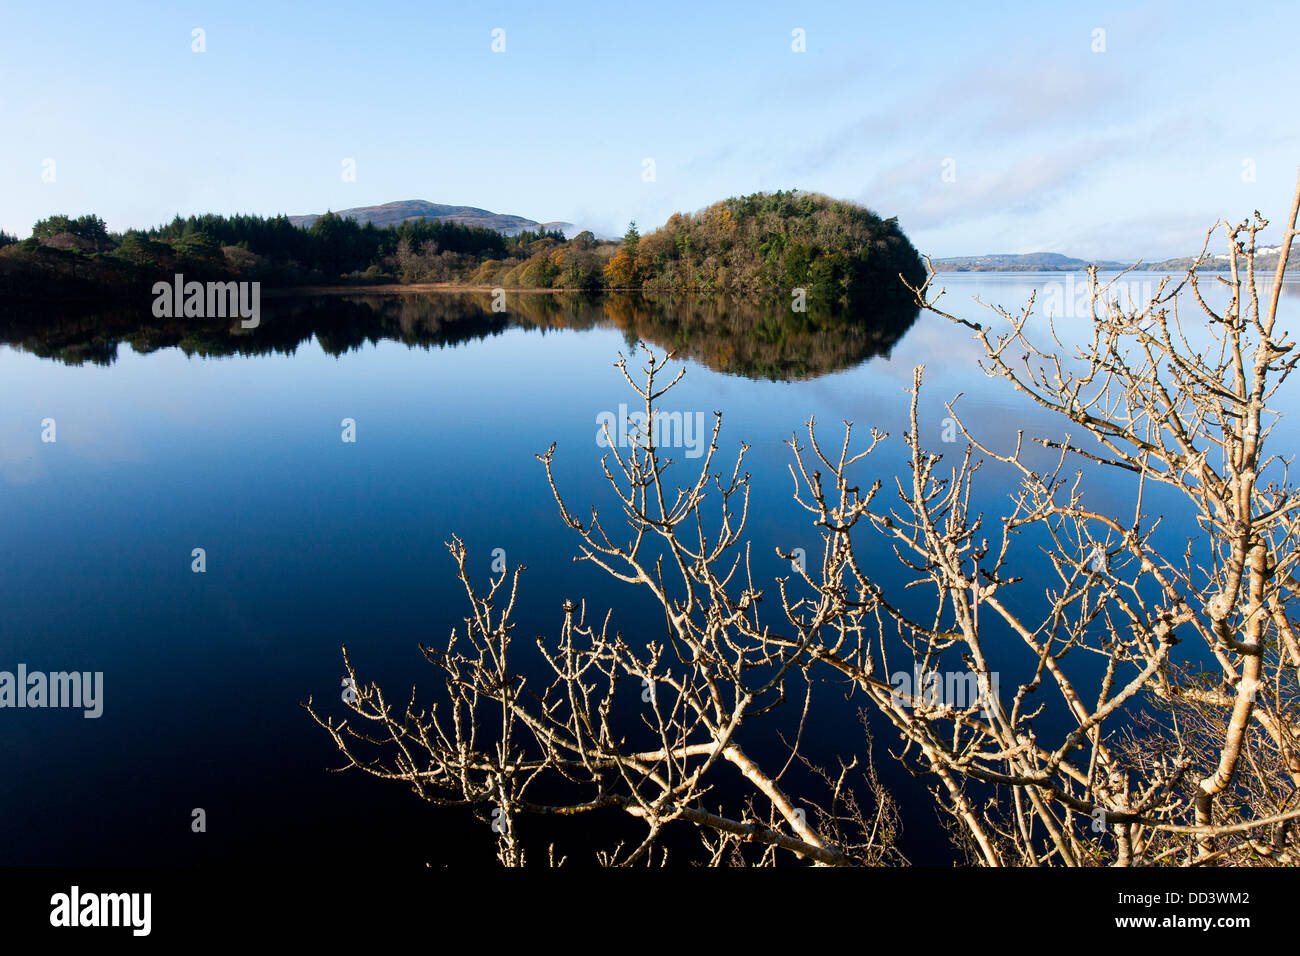 A reflection of trees in Lough Gill, made famous by W.B.Yeats poem, Innisfree in County Sligo, Northern Ireland Stock Photo